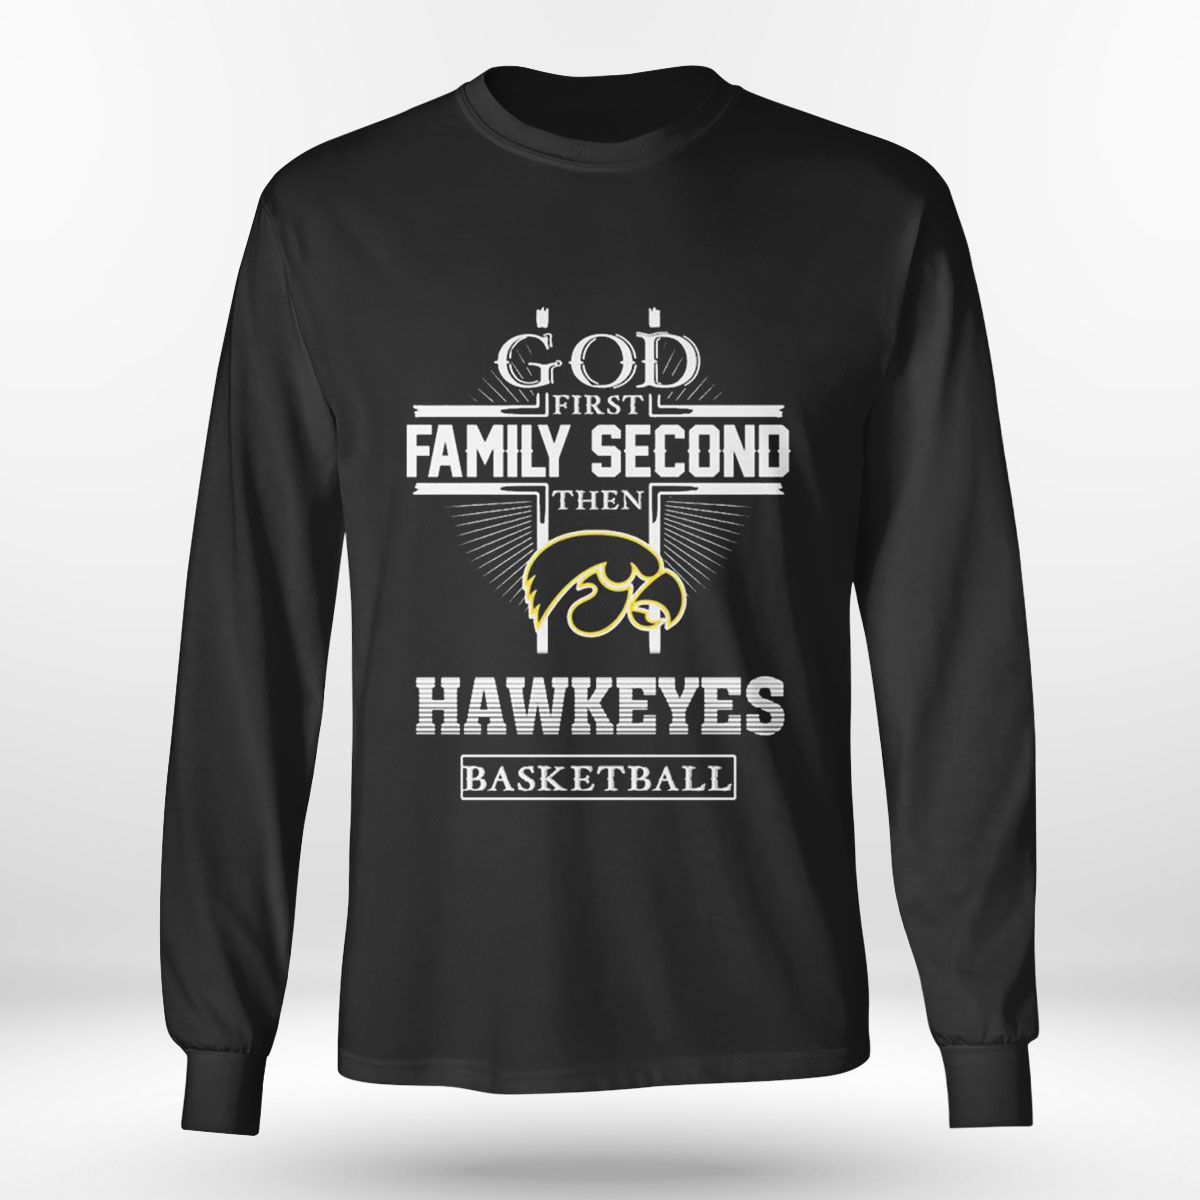 God First Family Second Then Iowa Hawkeyes Basketball T-shirt